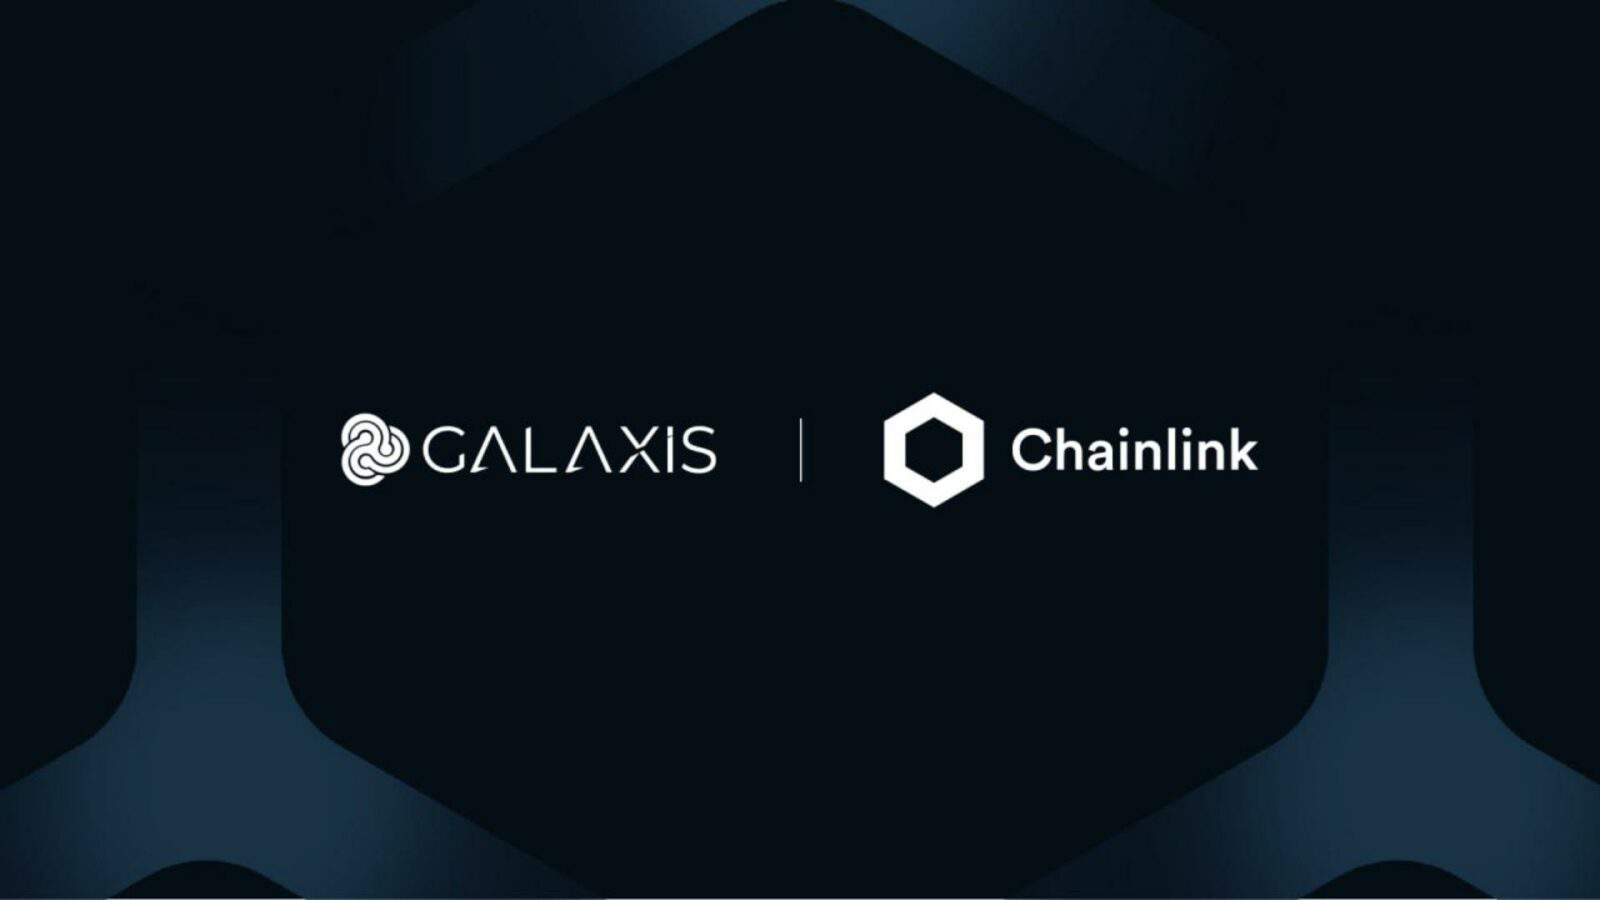 Galaxis Joins Chainlink BUILD Program in Order to Accelerate NFT Toolkit Adoption